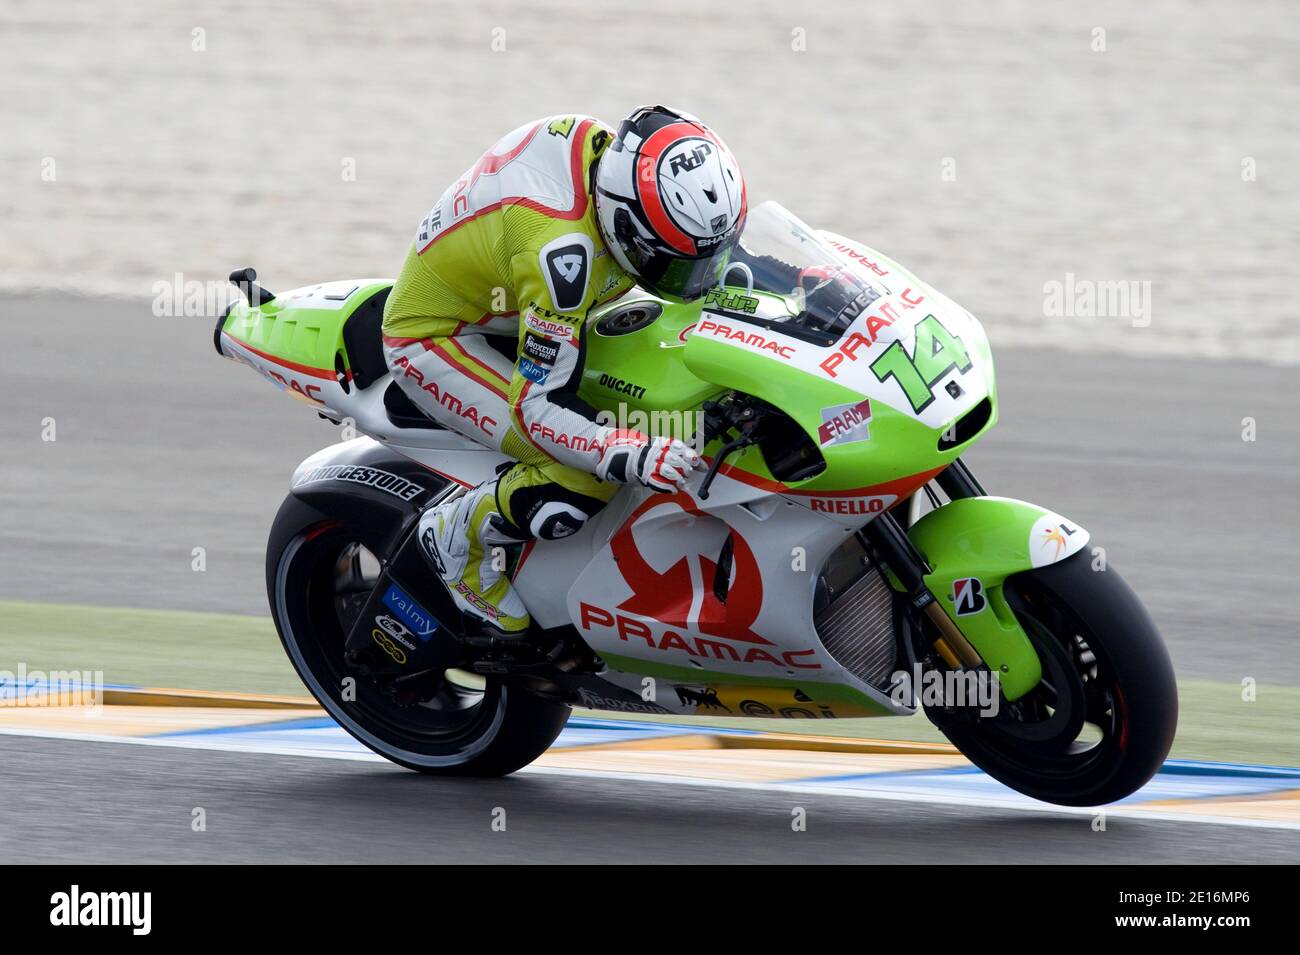 France's MotoGP rider Randy De Puniet from Ducati Pramac during qualifying  of MotoGP Grand Prix of France in Le Mans, France on May 14, 2011. Photo  Malkon/ABACAPRESS.COM Stock Photo - Alamy